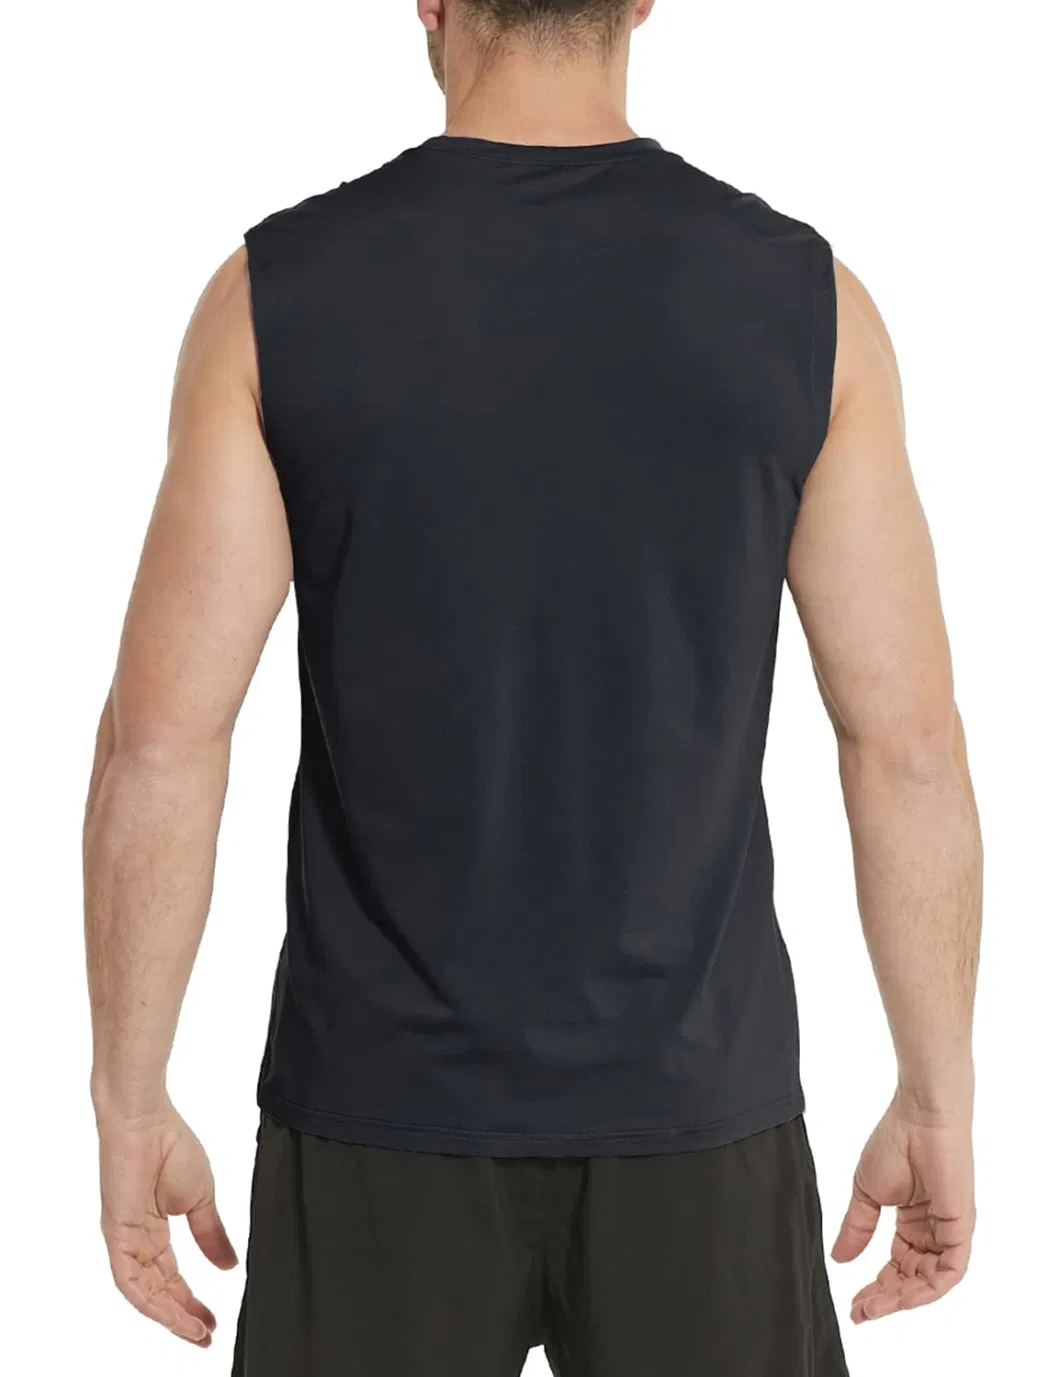 Custom Screen Print Blank 95% Polyester 5% Spandex Men&prime;s Tank Tops Sleeveless Shirts Gym Workout Running Athletic Quick Dry